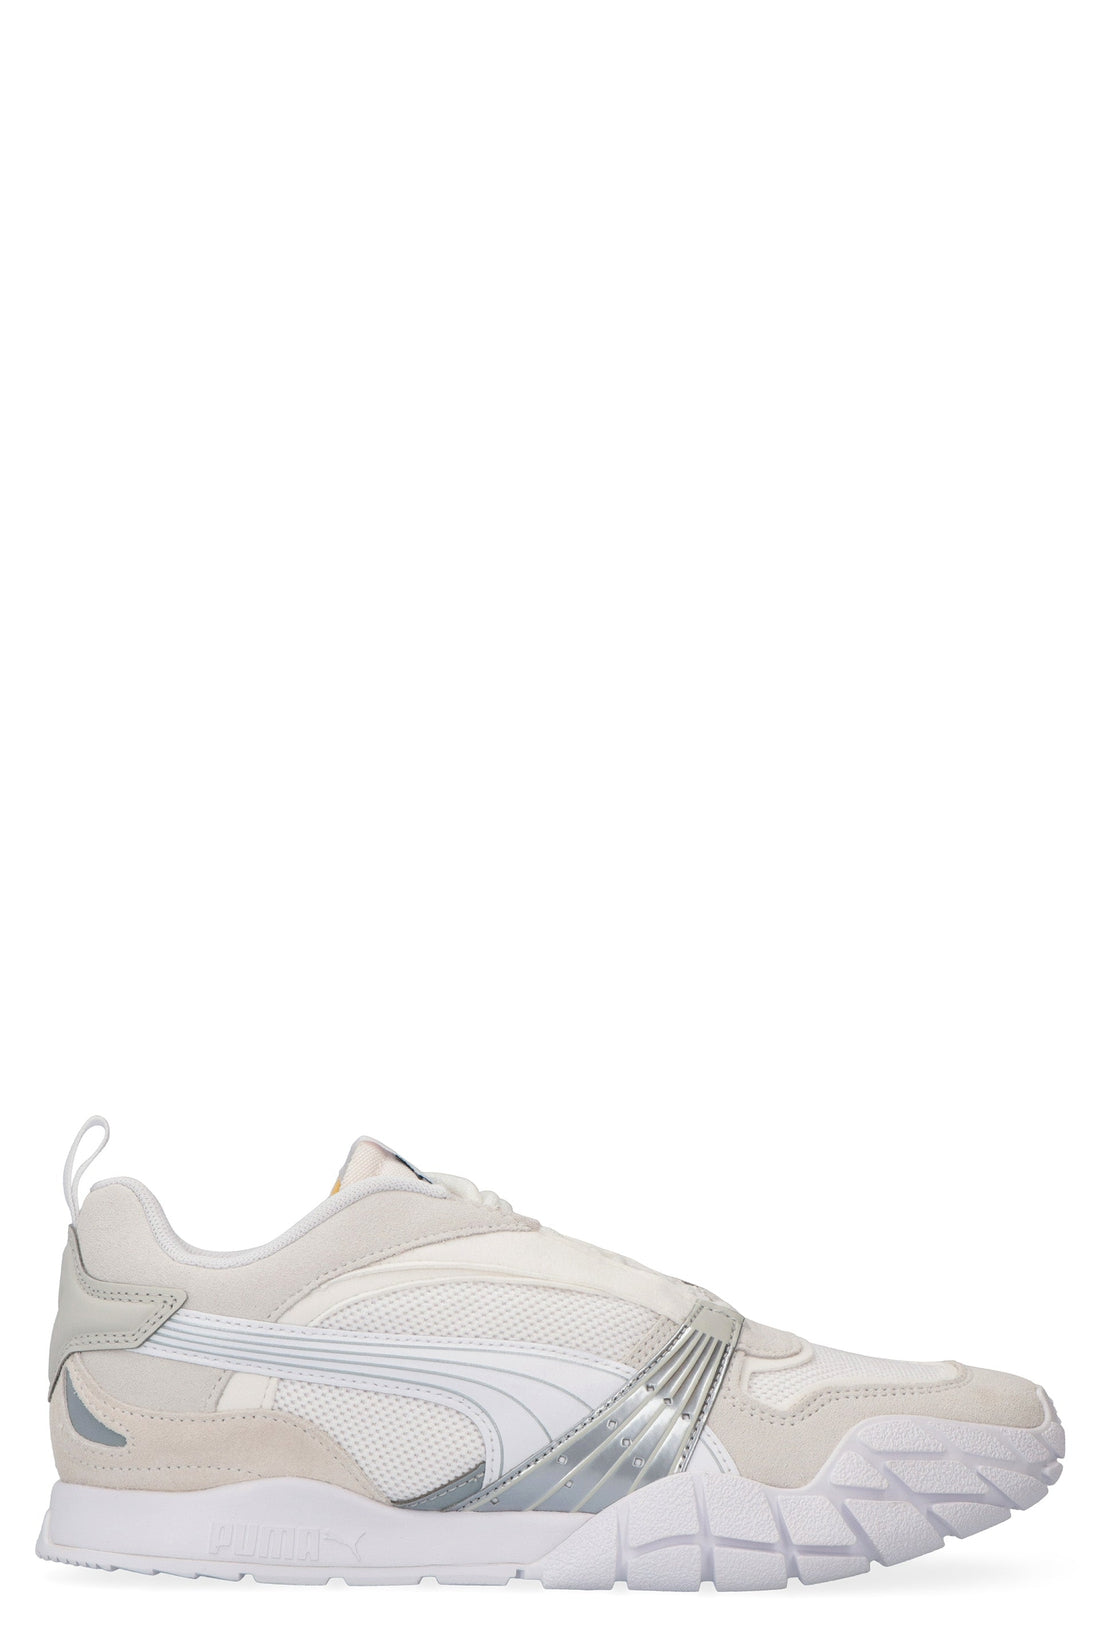 Puma-OUTLET-SALE-Kyron Wild Beasts sneakers-ARCHIVIST